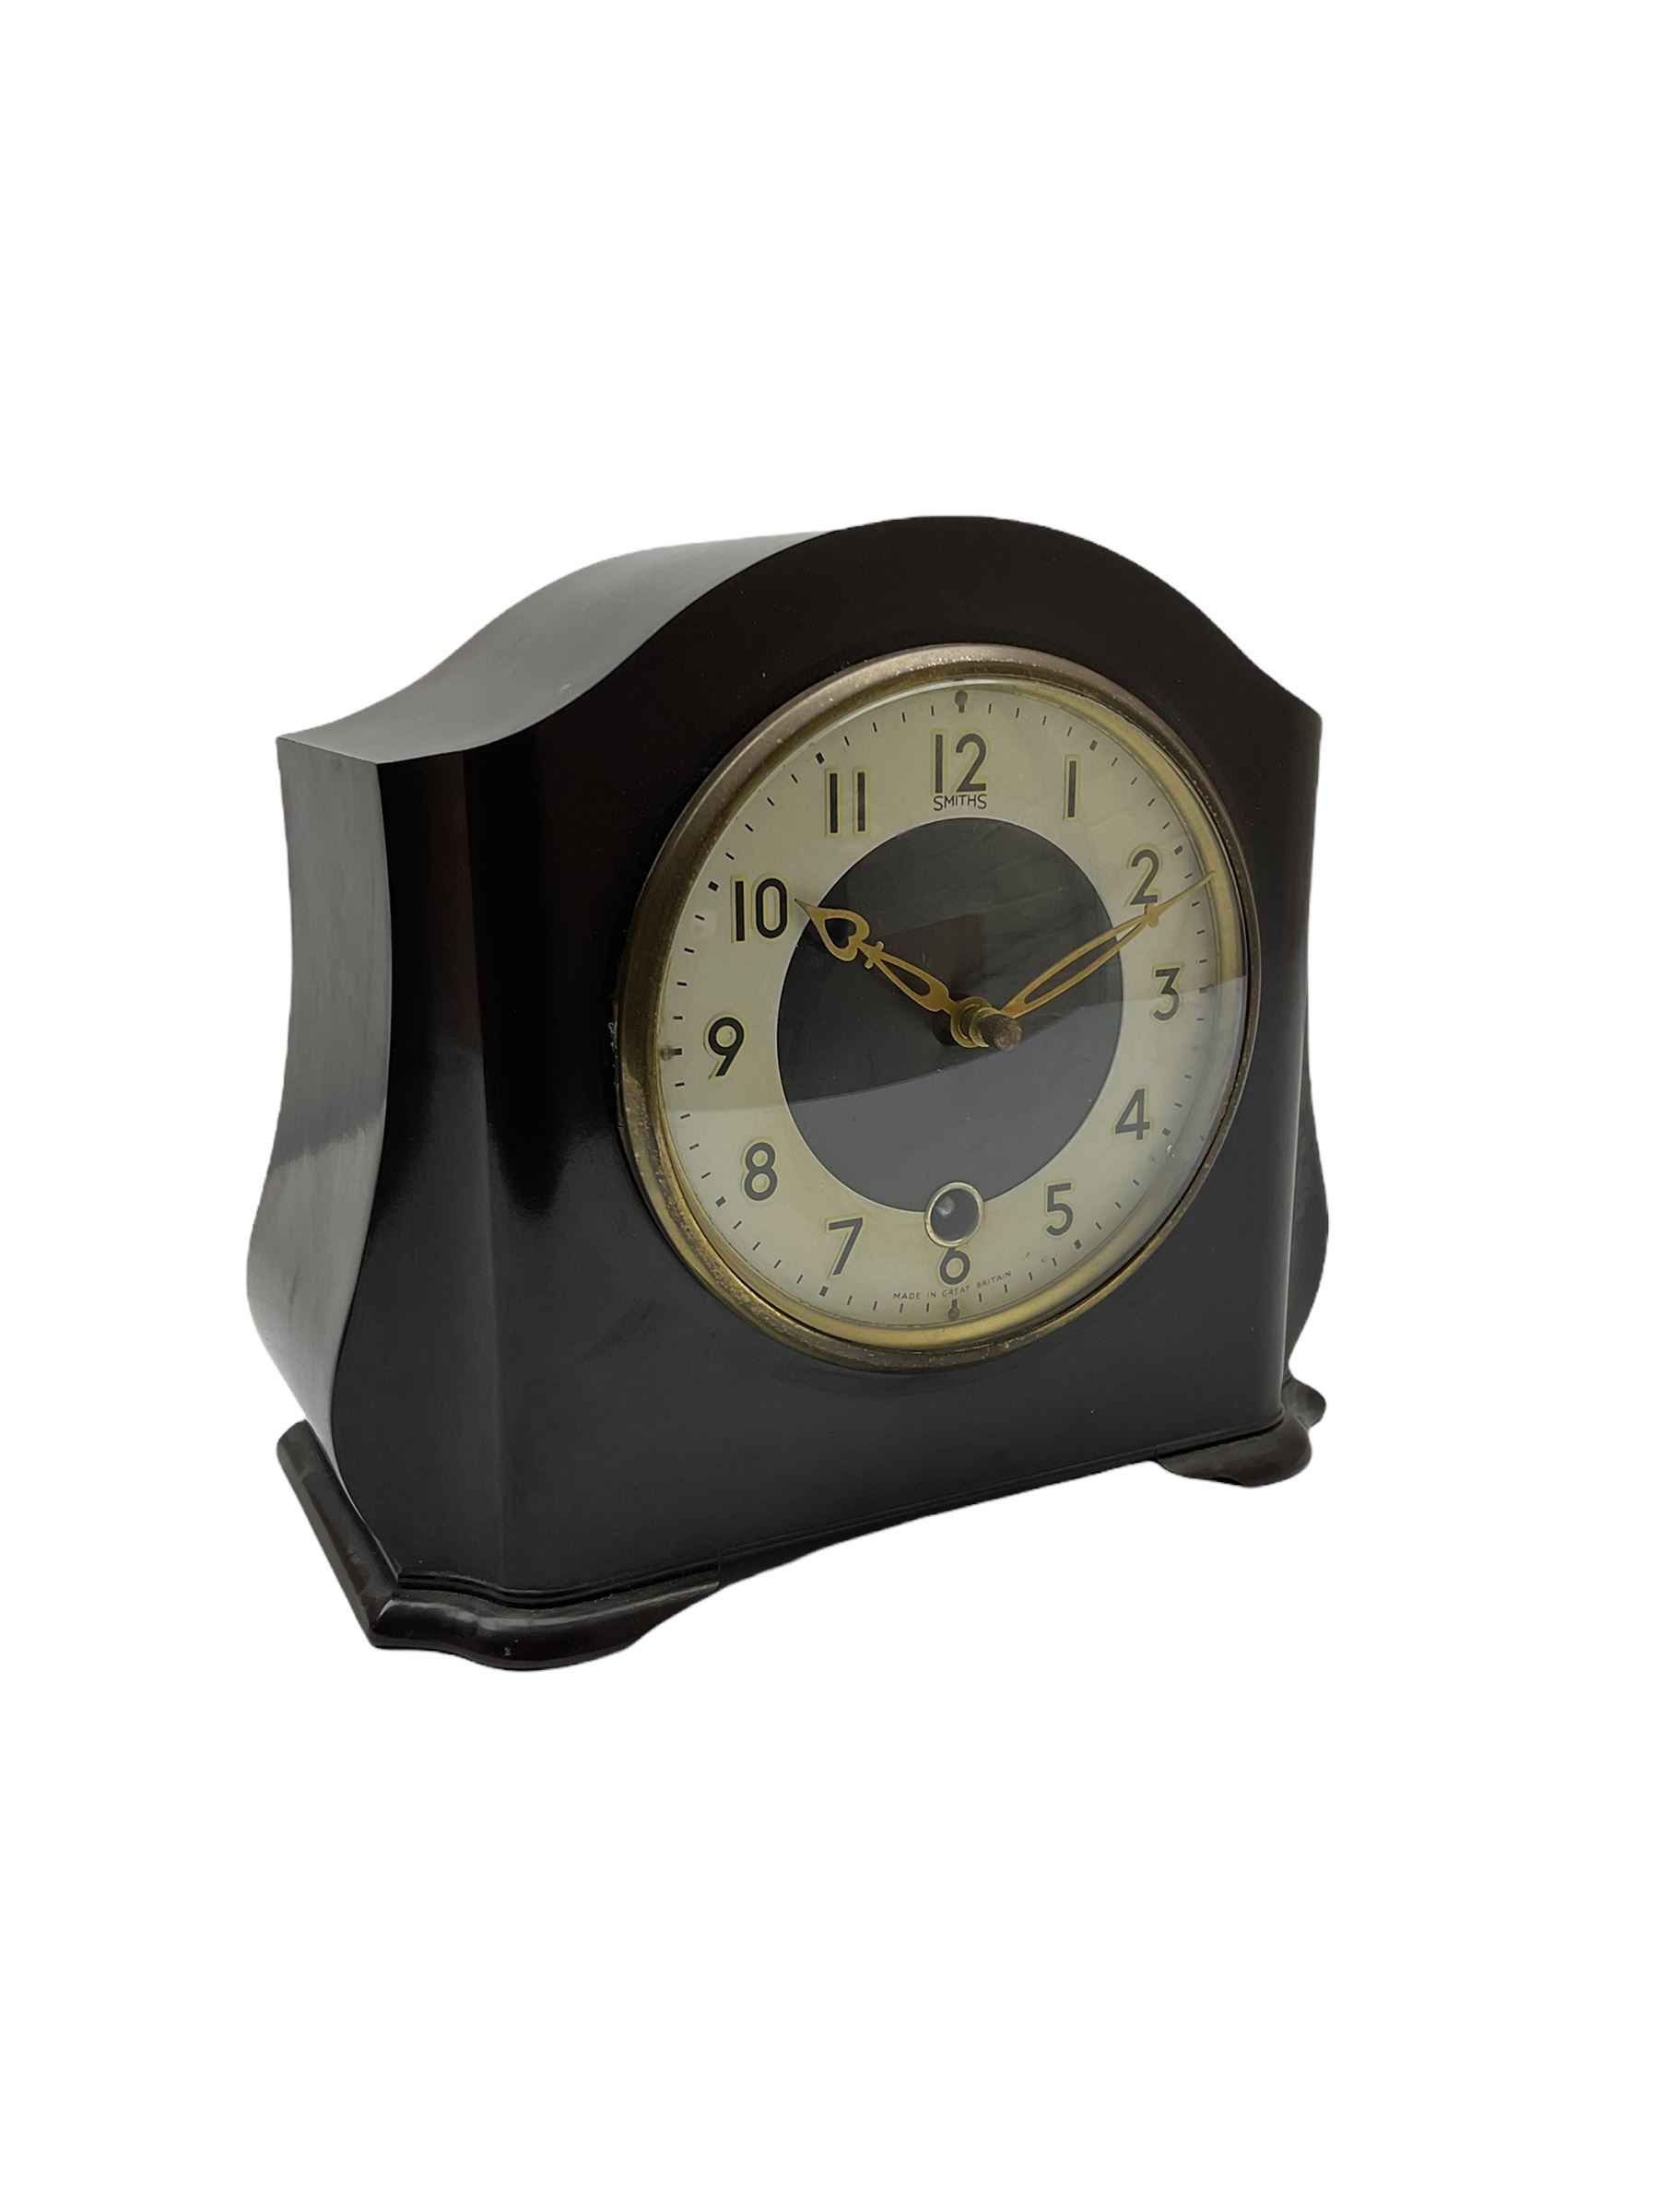 A Retro Art-Deco 1950's Bakelite cased mantel clock with a Smiths timepiece movement housed in a dom - Image 2 of 3